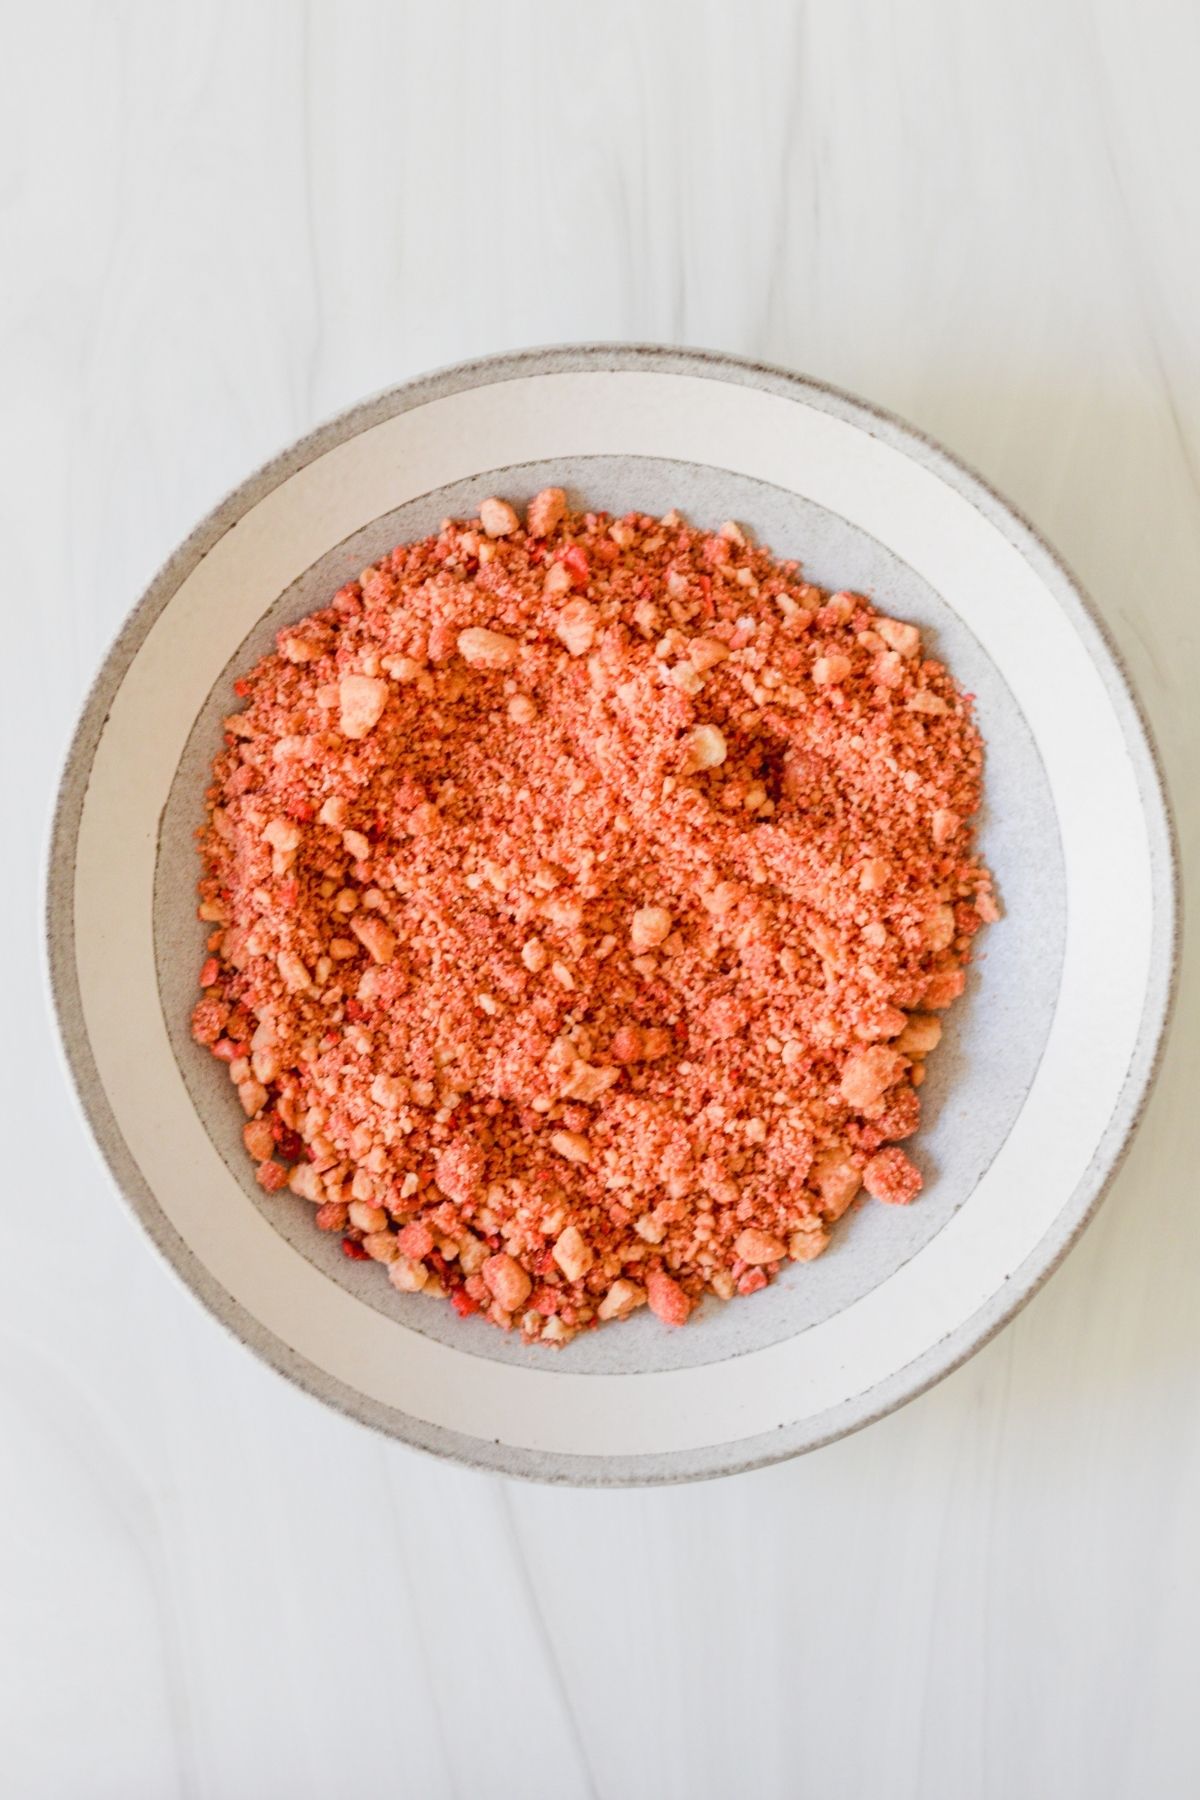 Strawberry crunch topping is made with freeze dried strawberries, shortbread cookies, strawberry JELLO and melted butter.